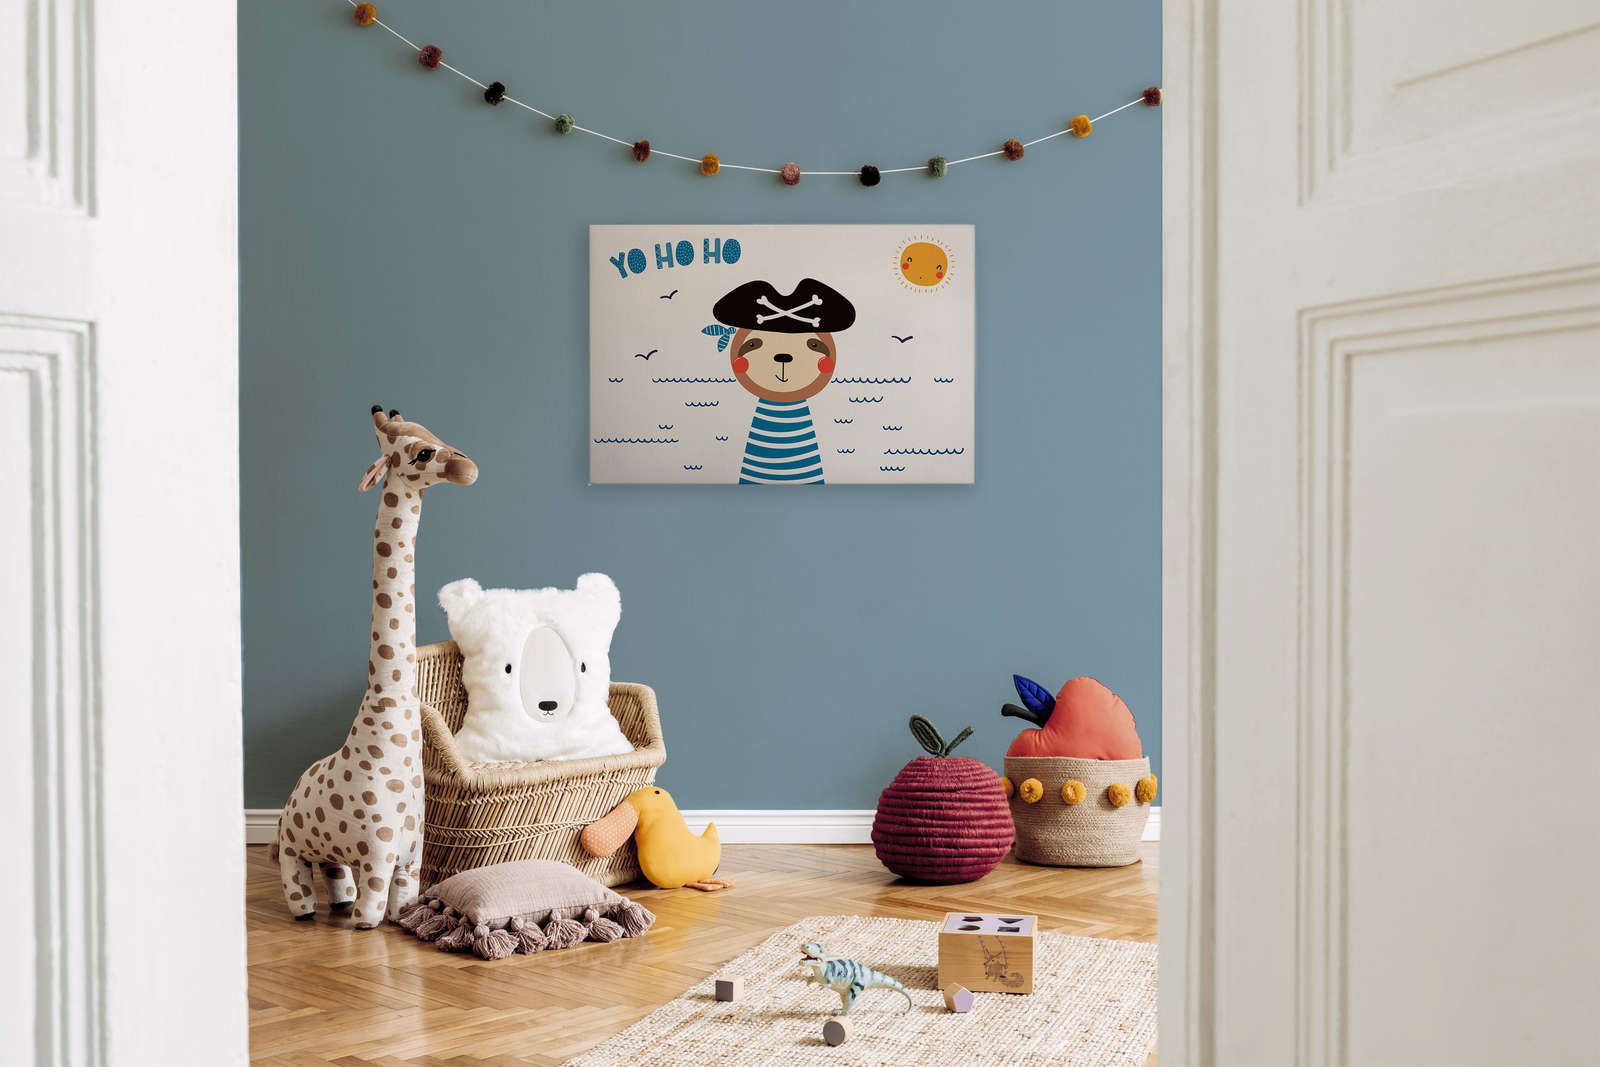             Canvas for children's room with bear pirate - 90 cm x 60 cm
        